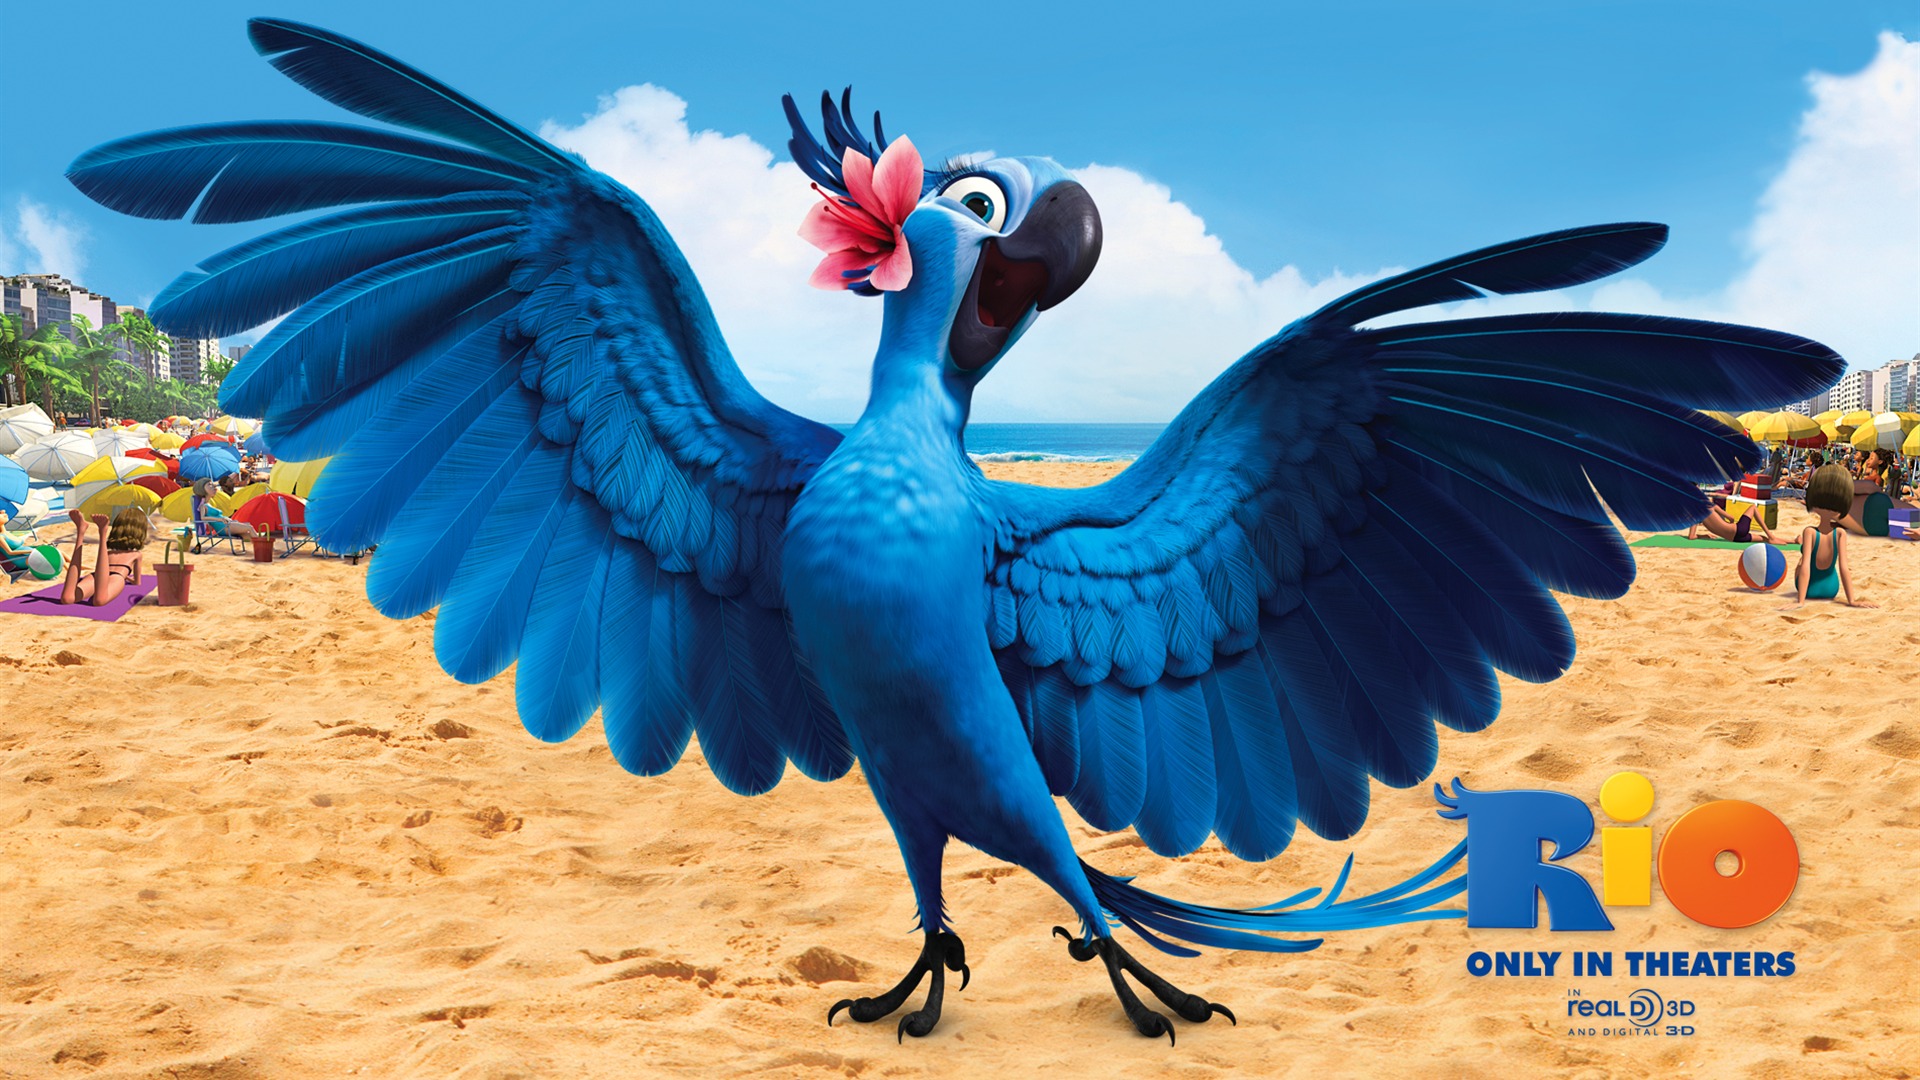 Rio 2011 wallpapers #1 - 1920x1080